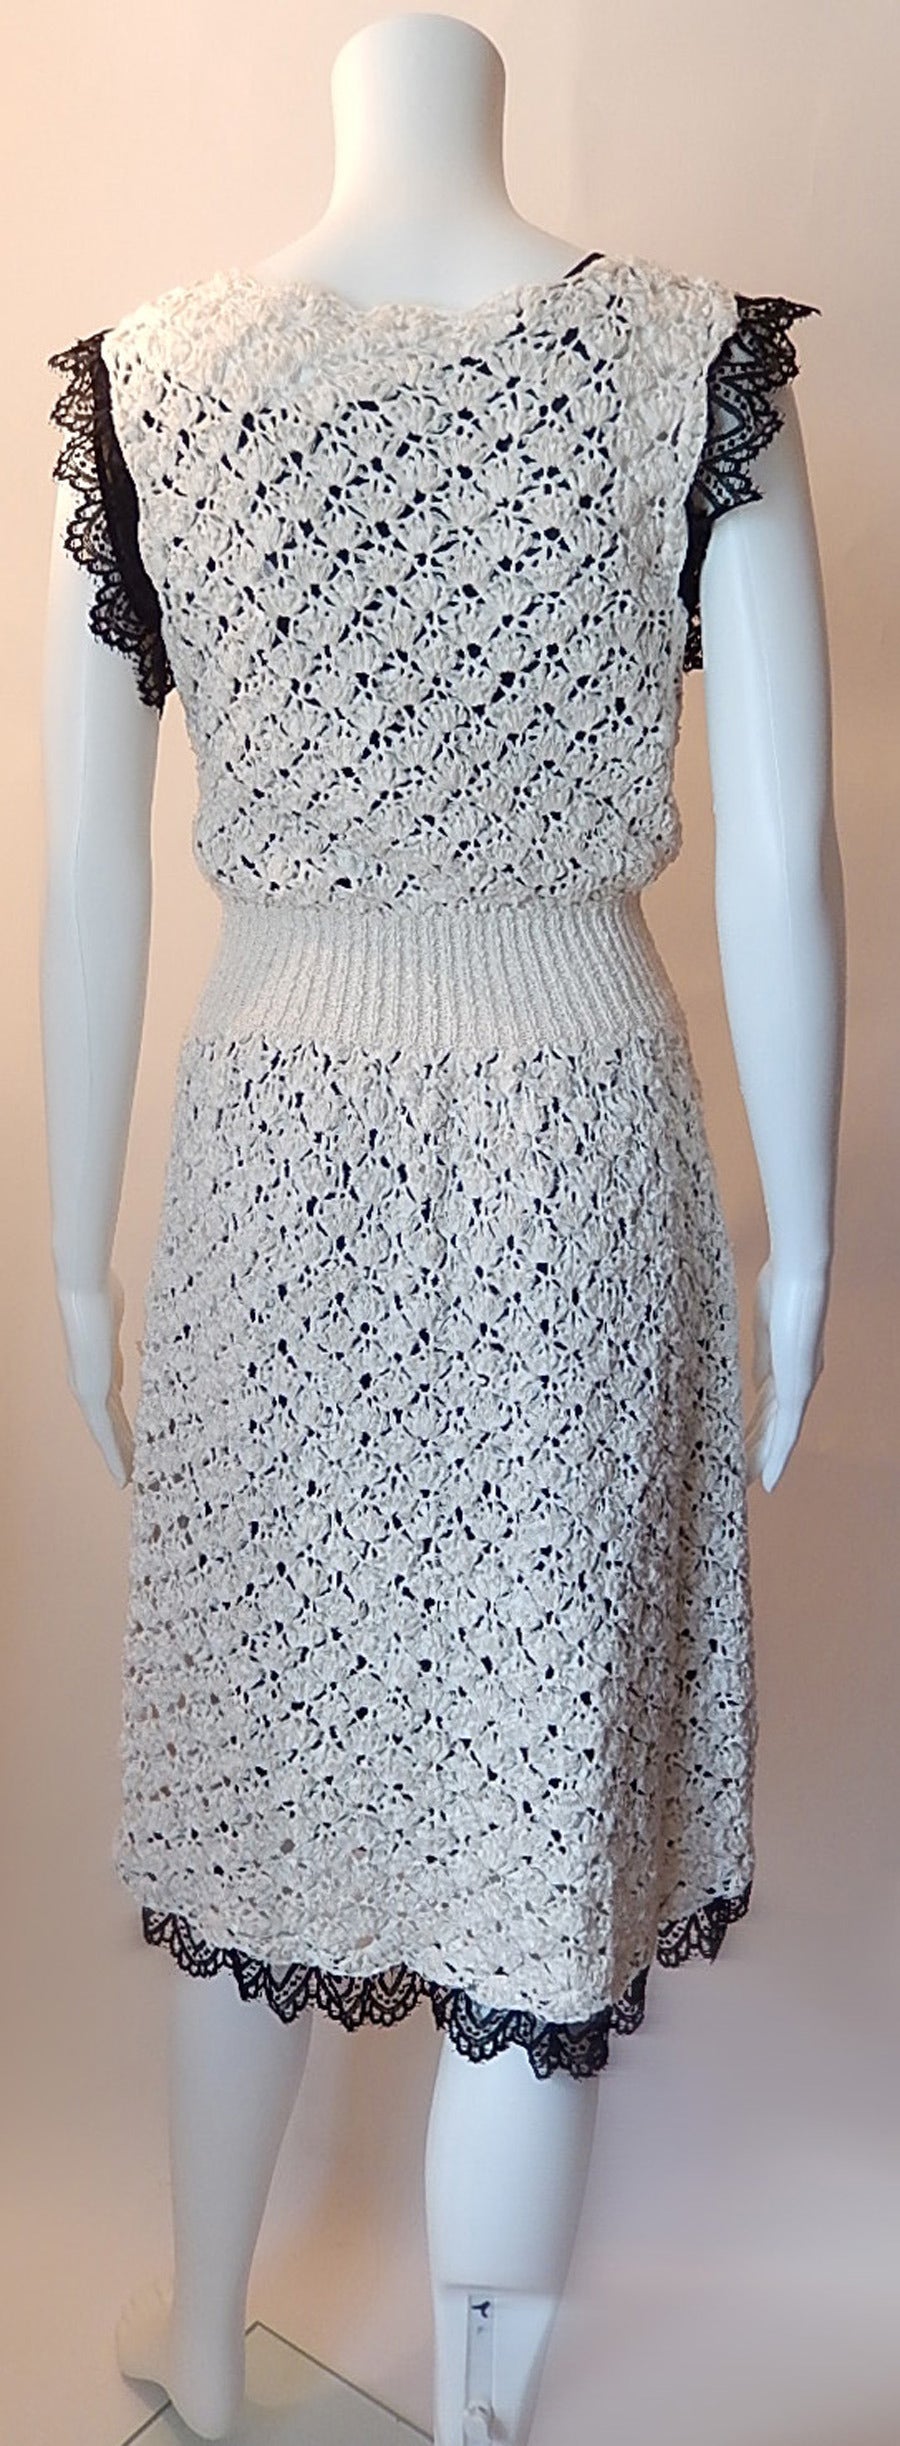 Chanel Ivory Silk Crocheted Dress with Black Slip Lace Edged Size 40 For Sale 1